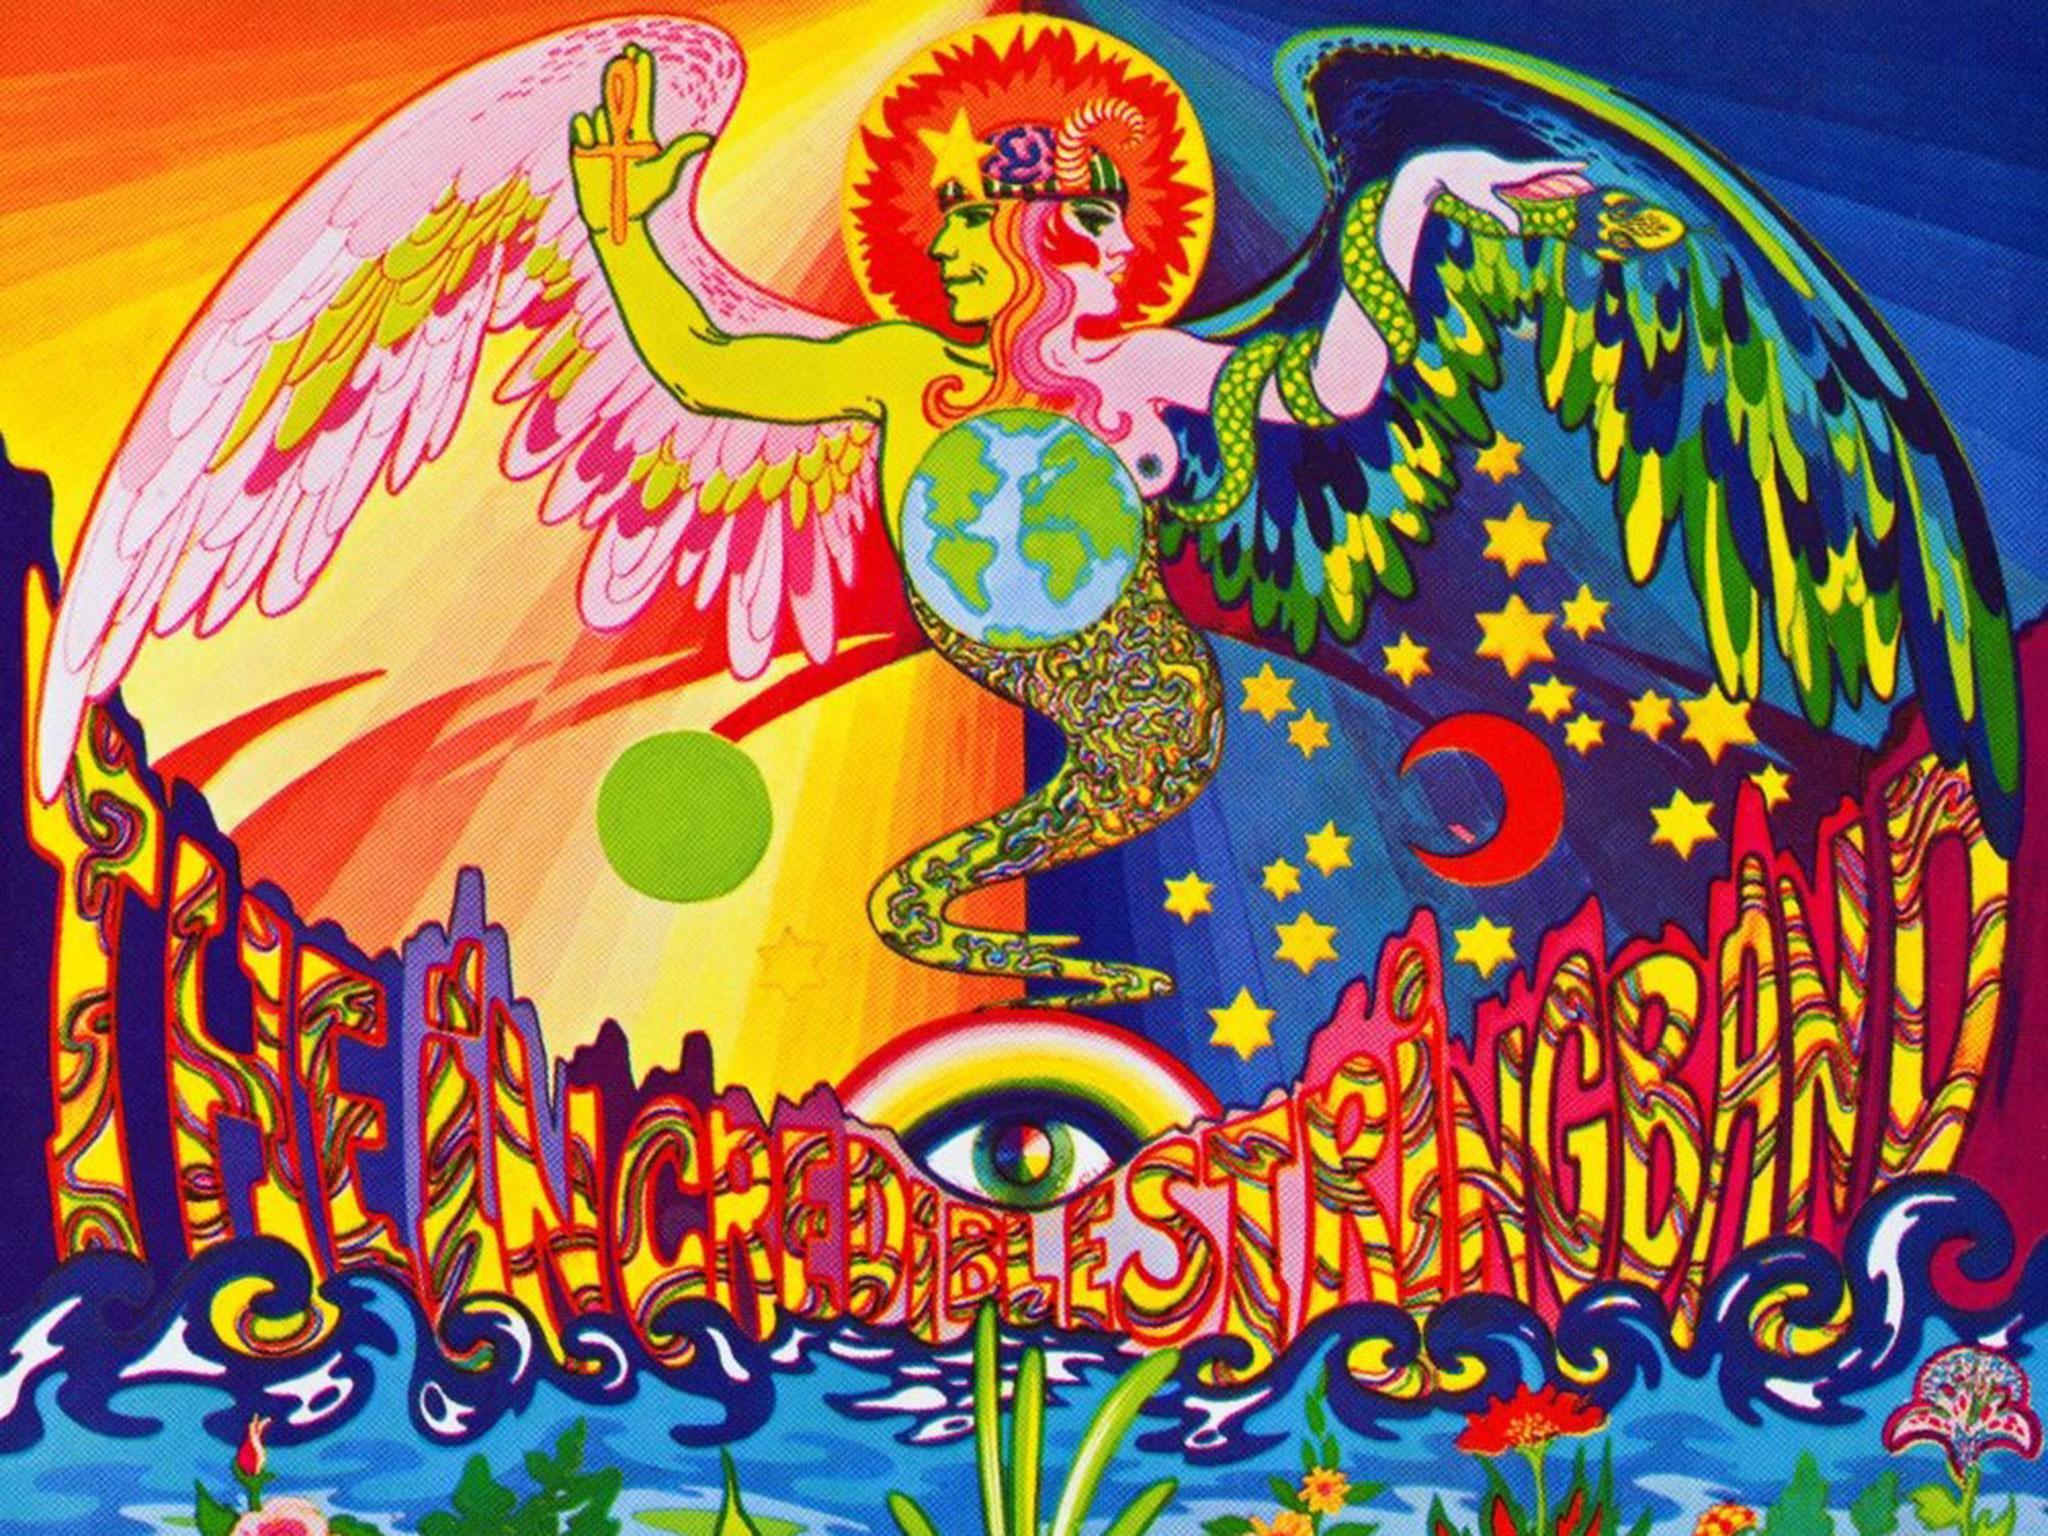 The cover of the Incredible String Band’s second LP, released in 1967, showed psychedelia’s influence on music and art